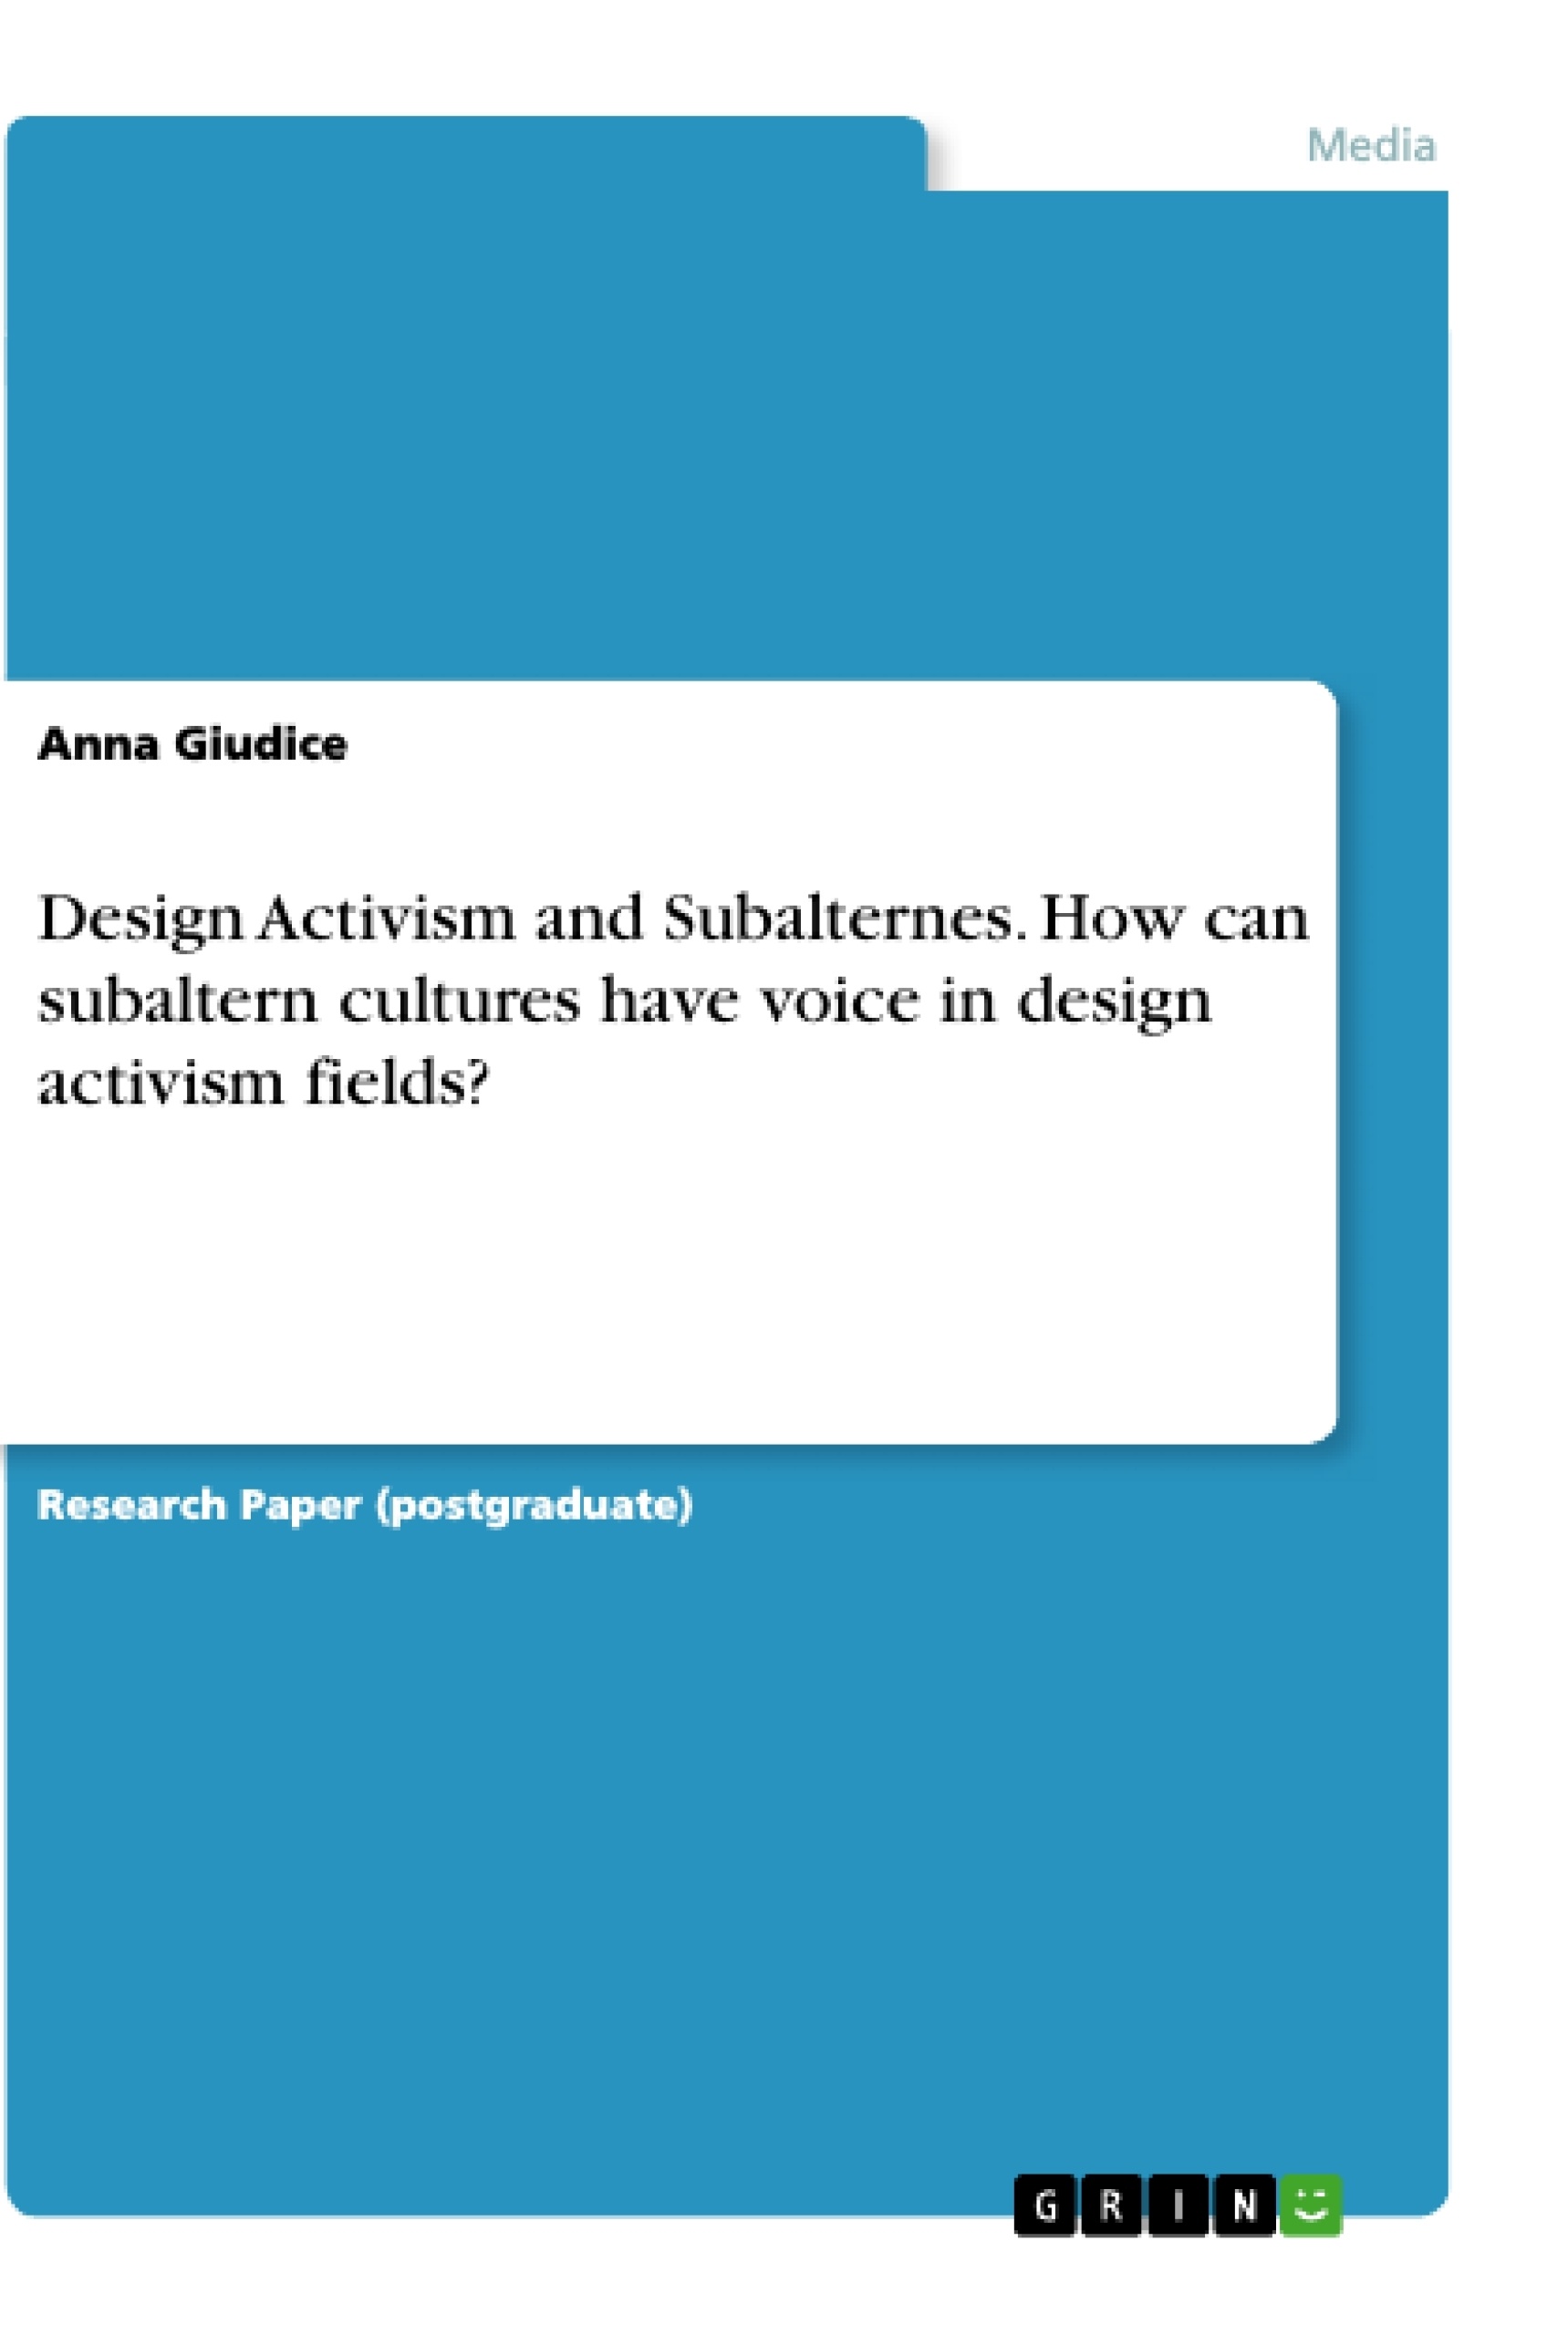 Title: Design Activism and Subalternes. How can subaltern cultures have voice in design activism fields?